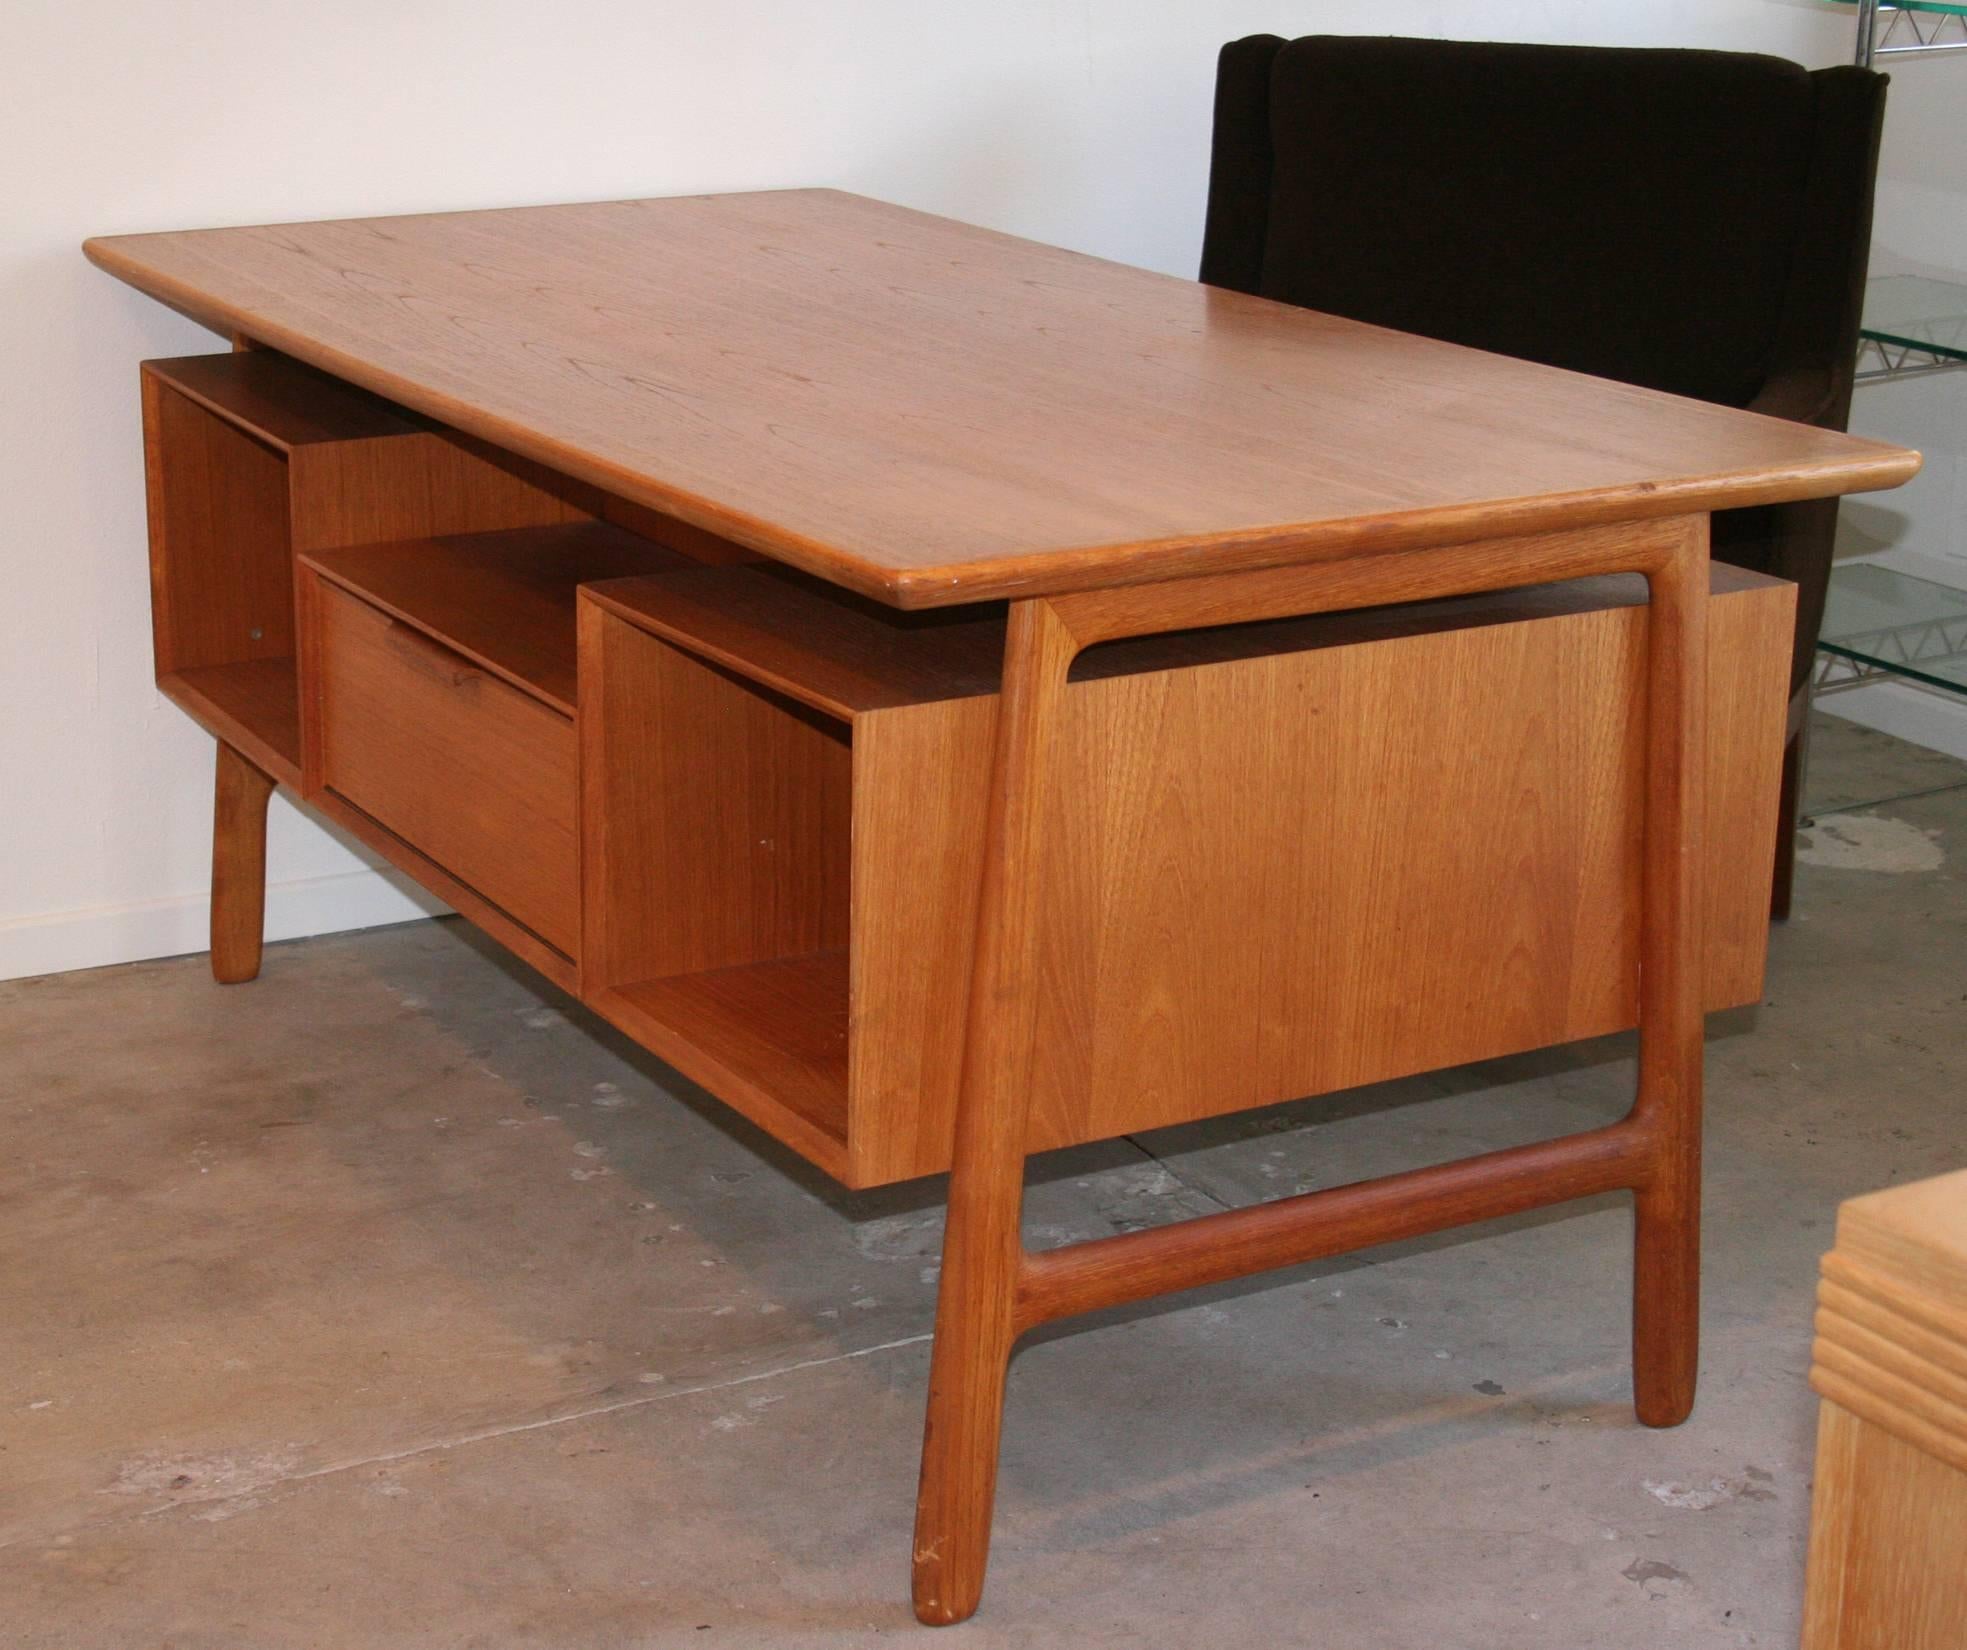 A Danish double pedestal desk in teak with floating top by Omann Jun Møbelfabrik. On desk side, three drawers in one bank and a file drawer in the other. On the opposite side, book cubbies flank a central drop front cabinet.